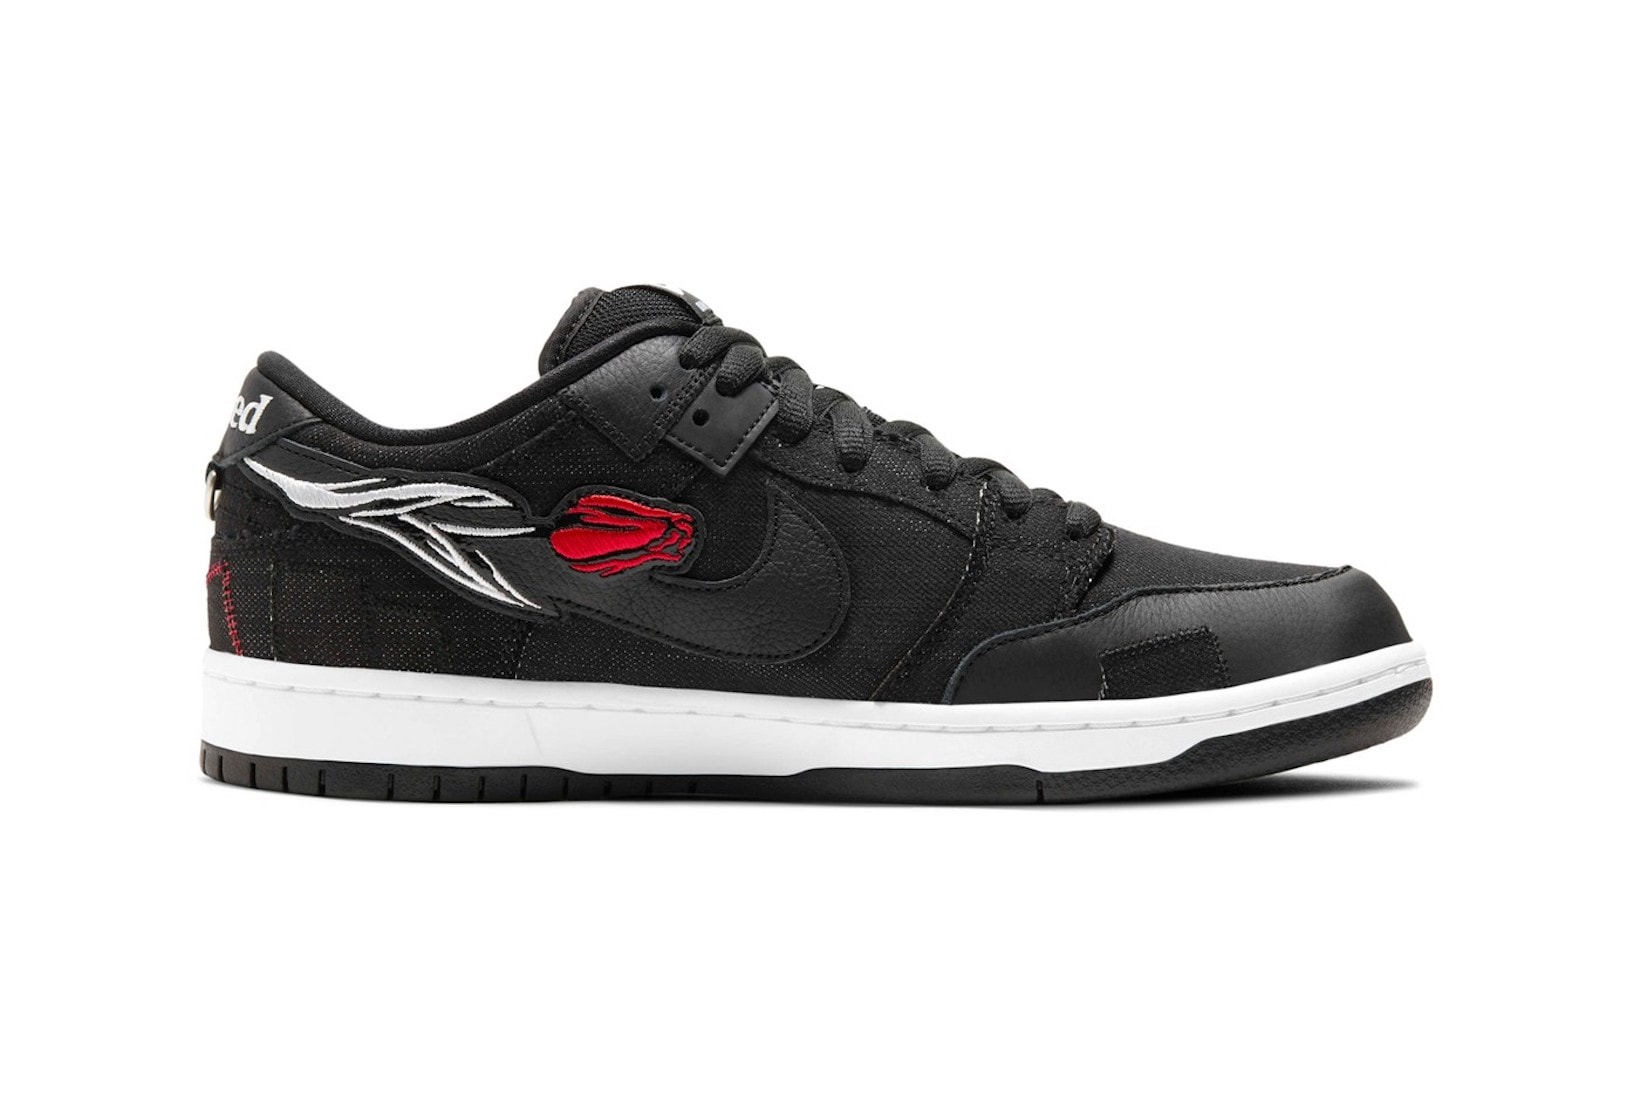 nike verdy sb dunk low wasted youth sneakers collaboration black white rose kicks shoes sneakerhead footwear lateral